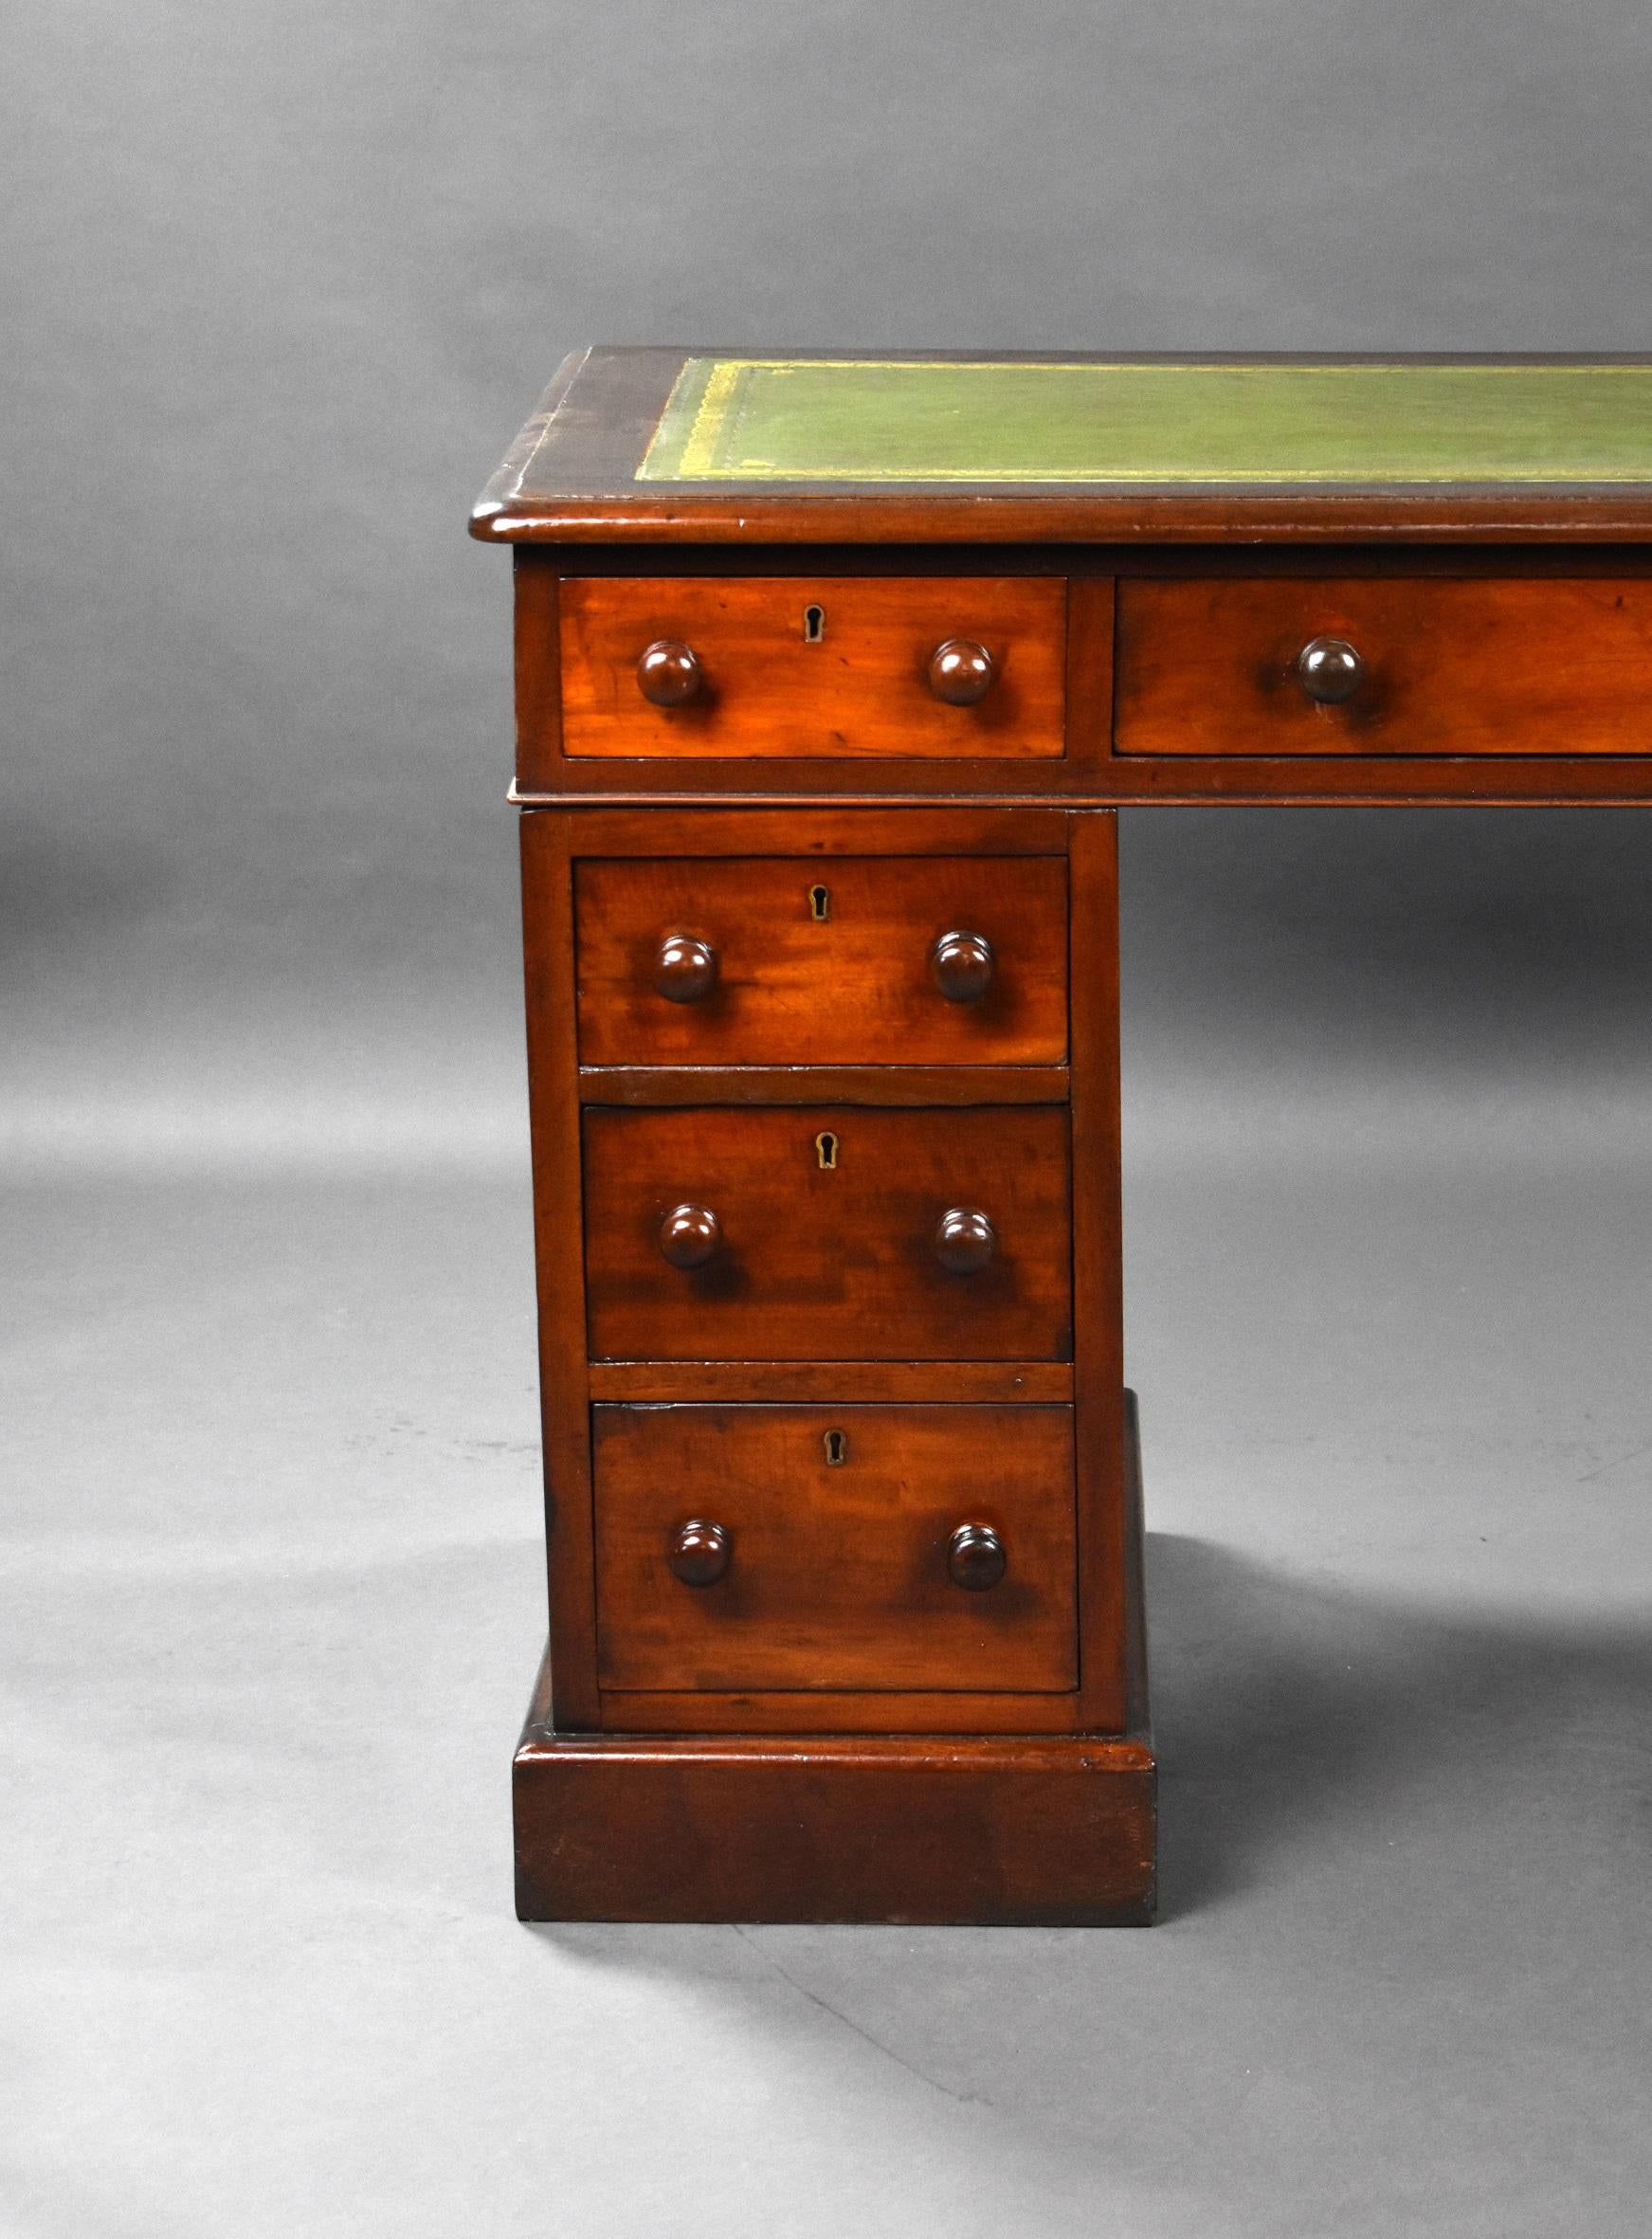 Victorian mahogany pedestal desk in good condition. The top inset with a green leather with gold tooling to the edge with corner motifs, below the desk has three drawers and sits on two pedestals with three drawers in each all with wooden knob